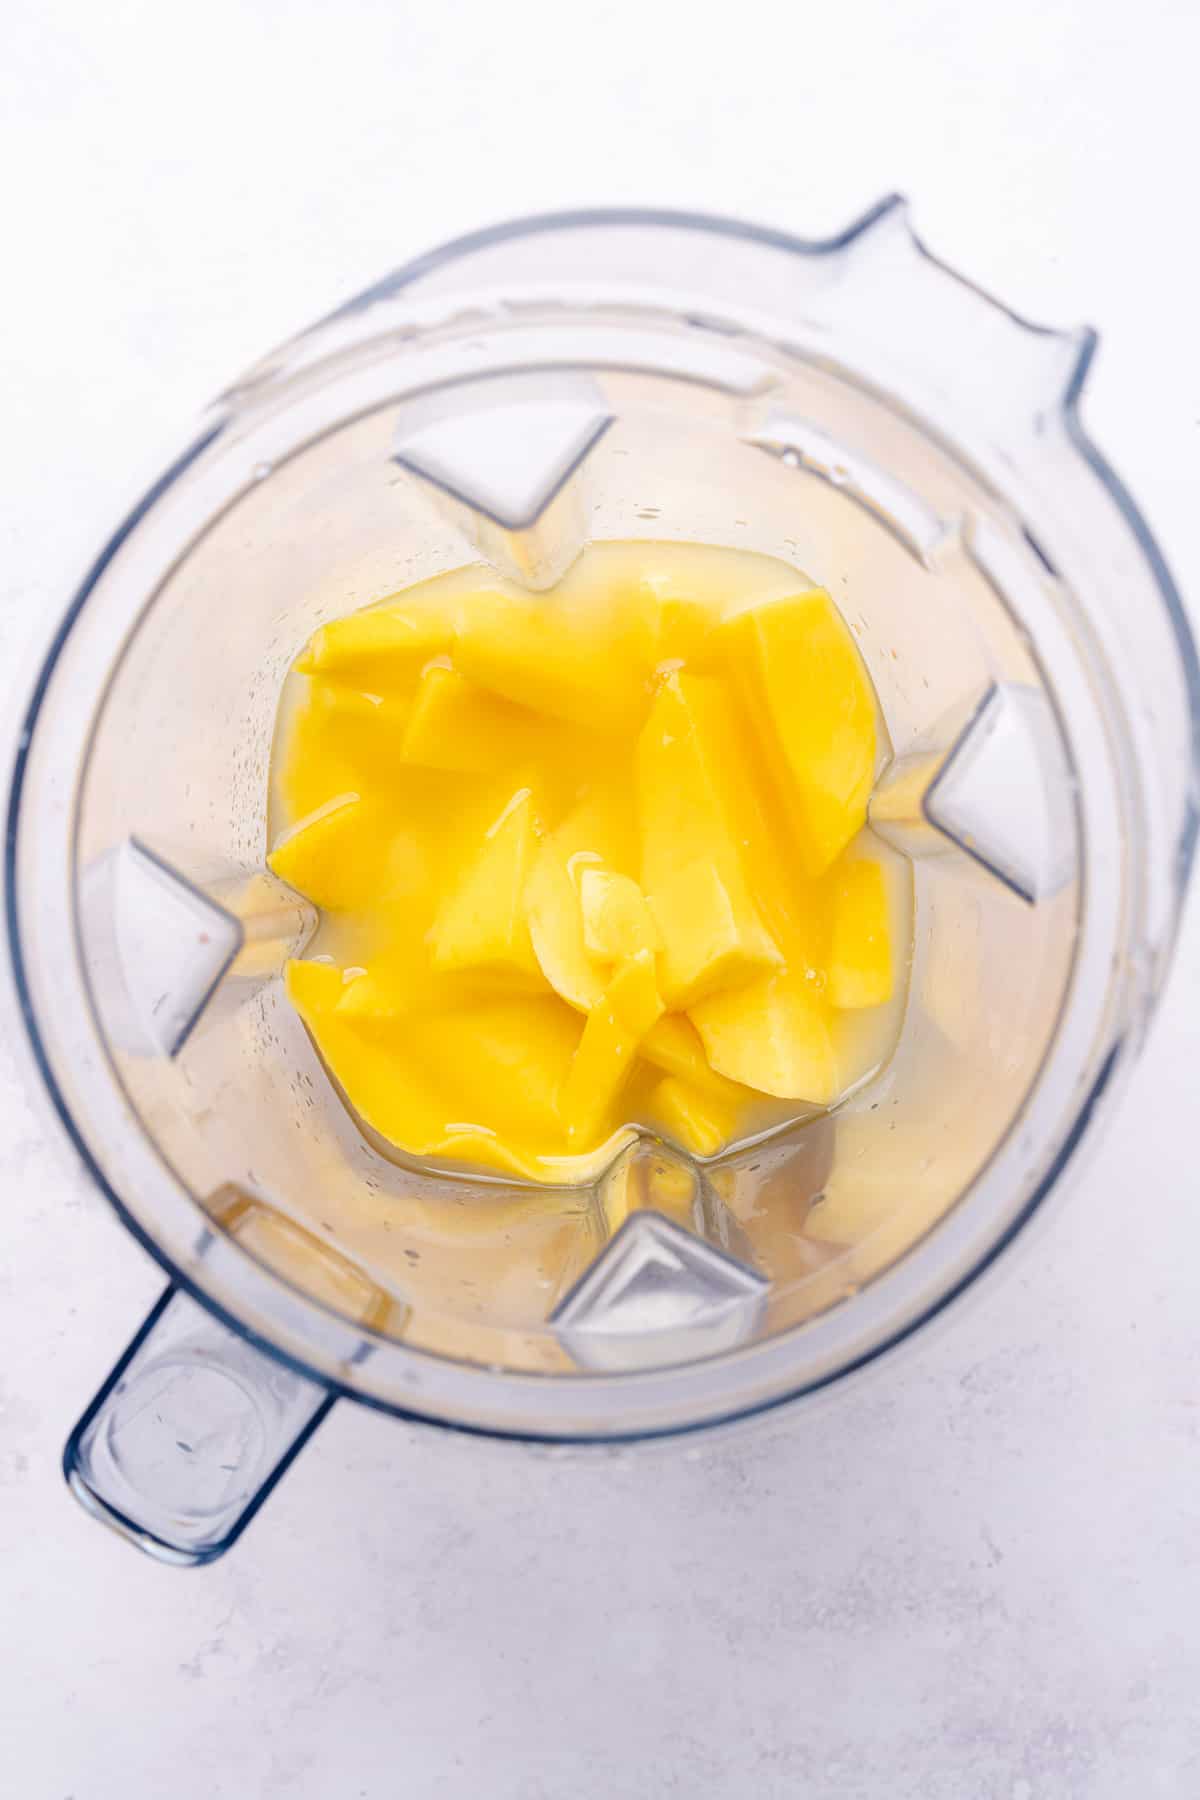 blending fresh mango, lime juice and simple syrup in a vitamix blender